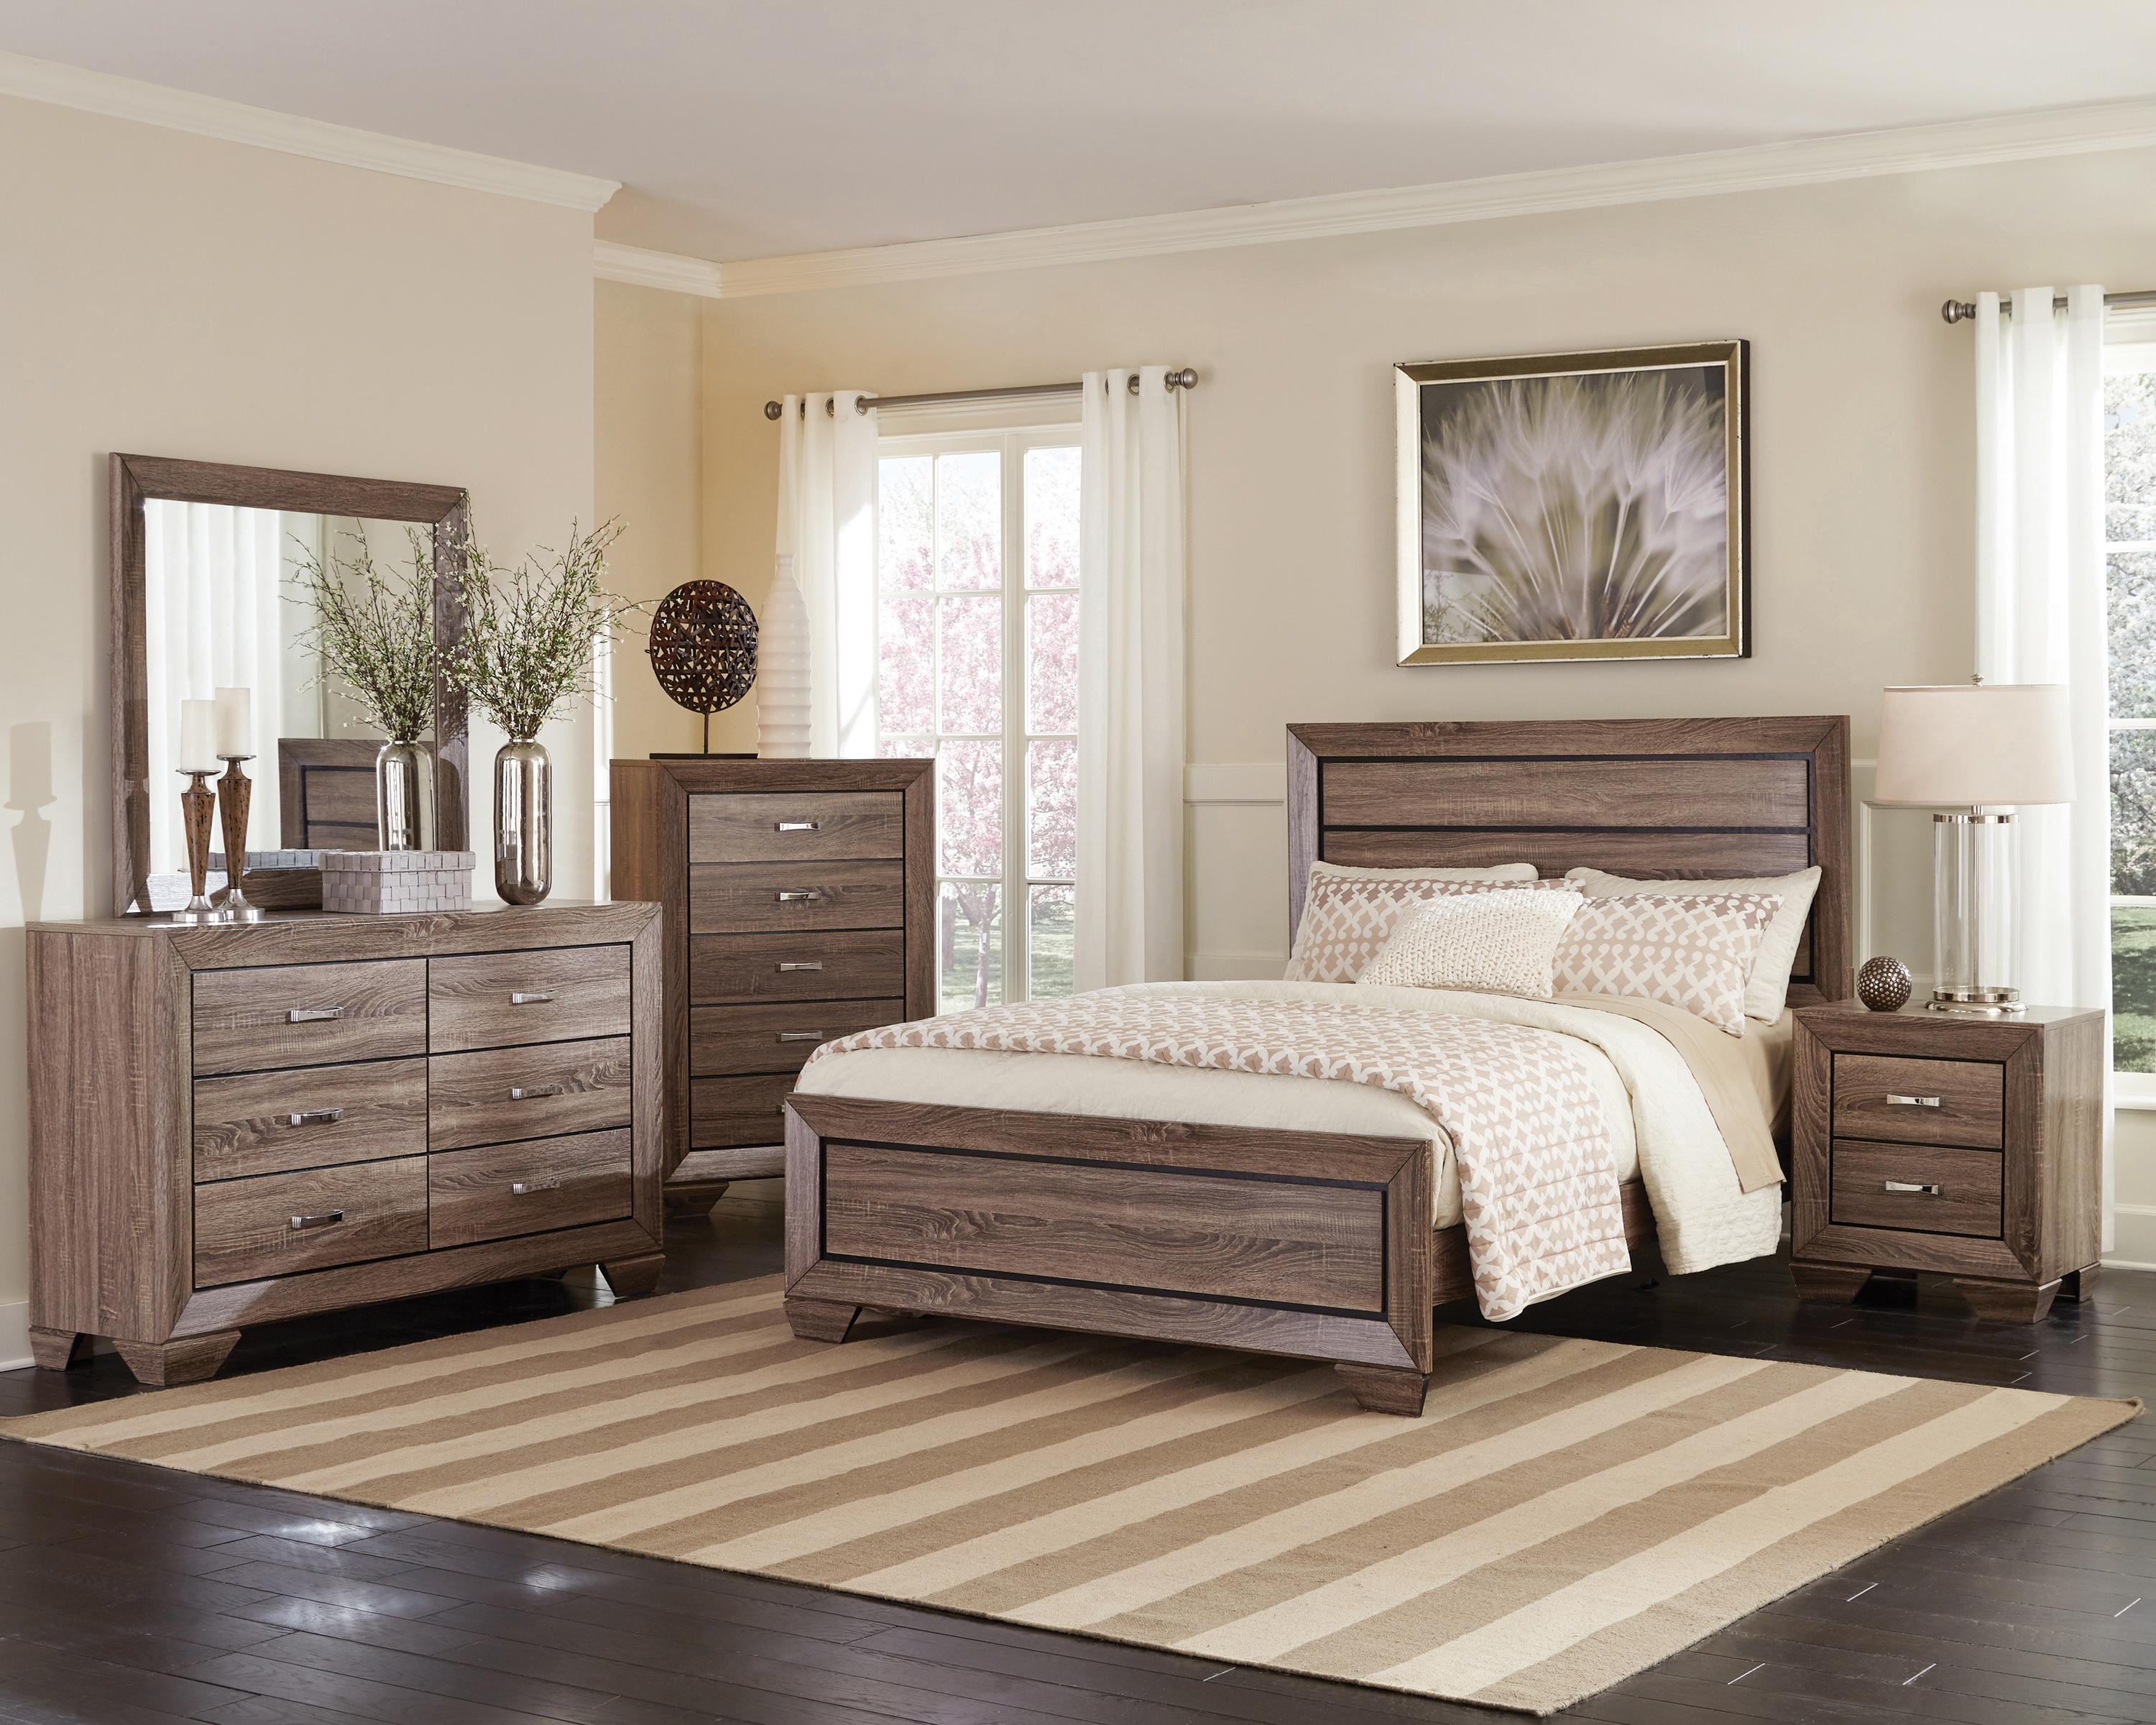 Transitional Bedroom Set 204190Q-6PC Kauffman 204190Q-6PC in Taupe 